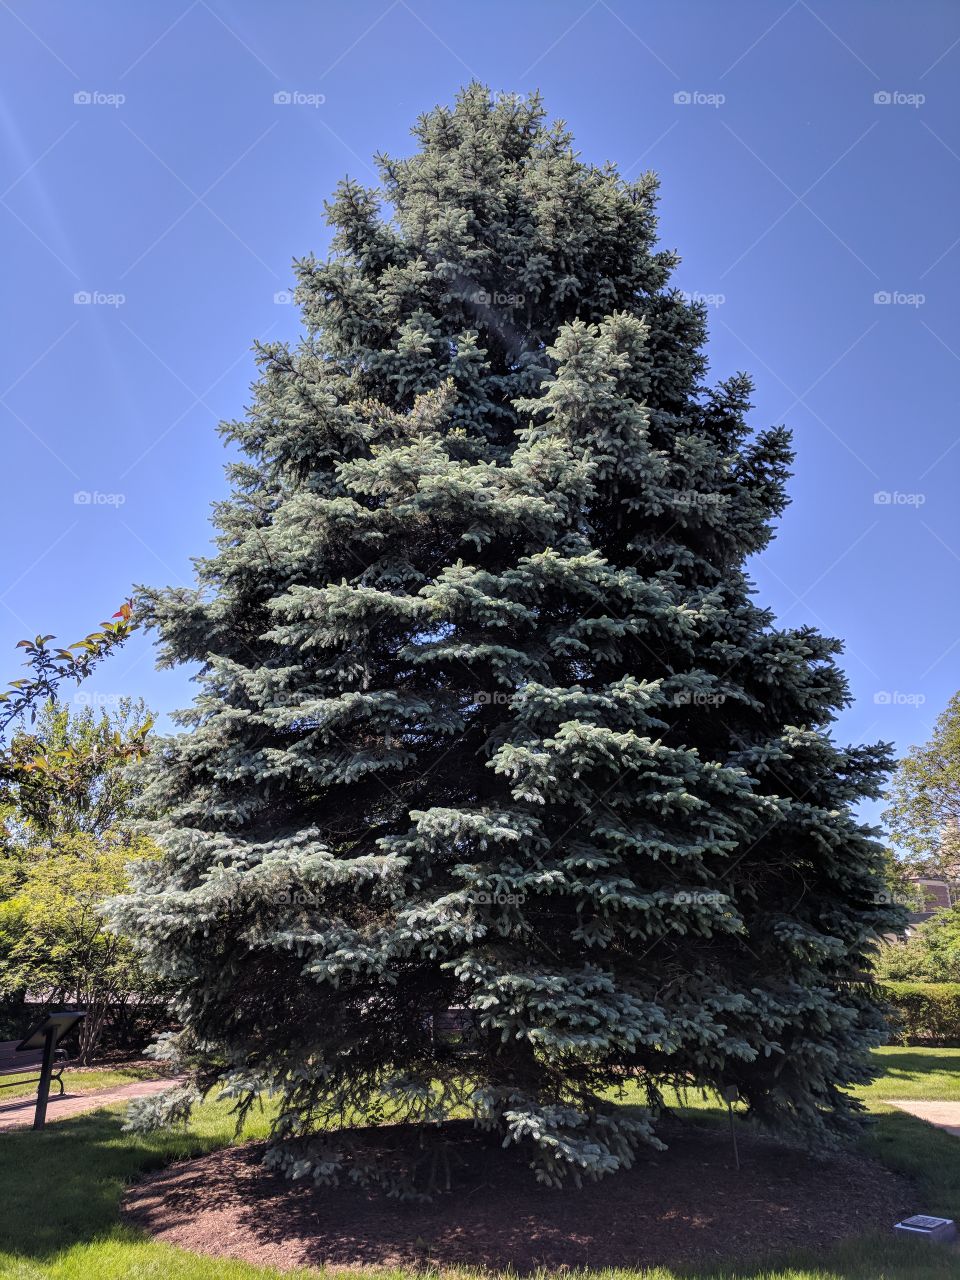 Tall evergreen tree with new spring growth.